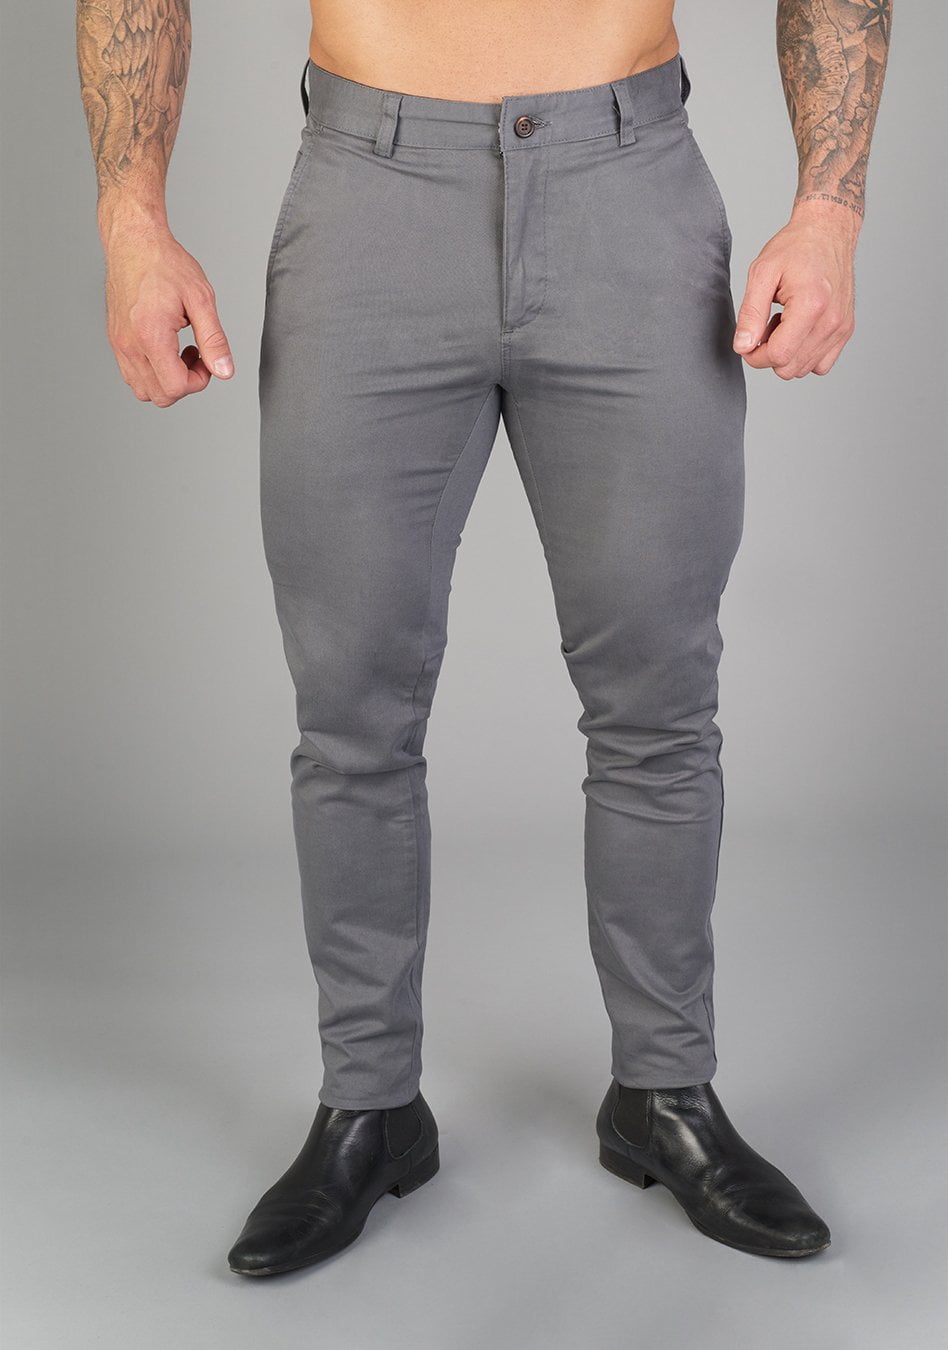 Komodo Athletic Fit Chinos - 73.70 - Oxcloth - Bottoms muscle-fit for bodybuilders and athletes